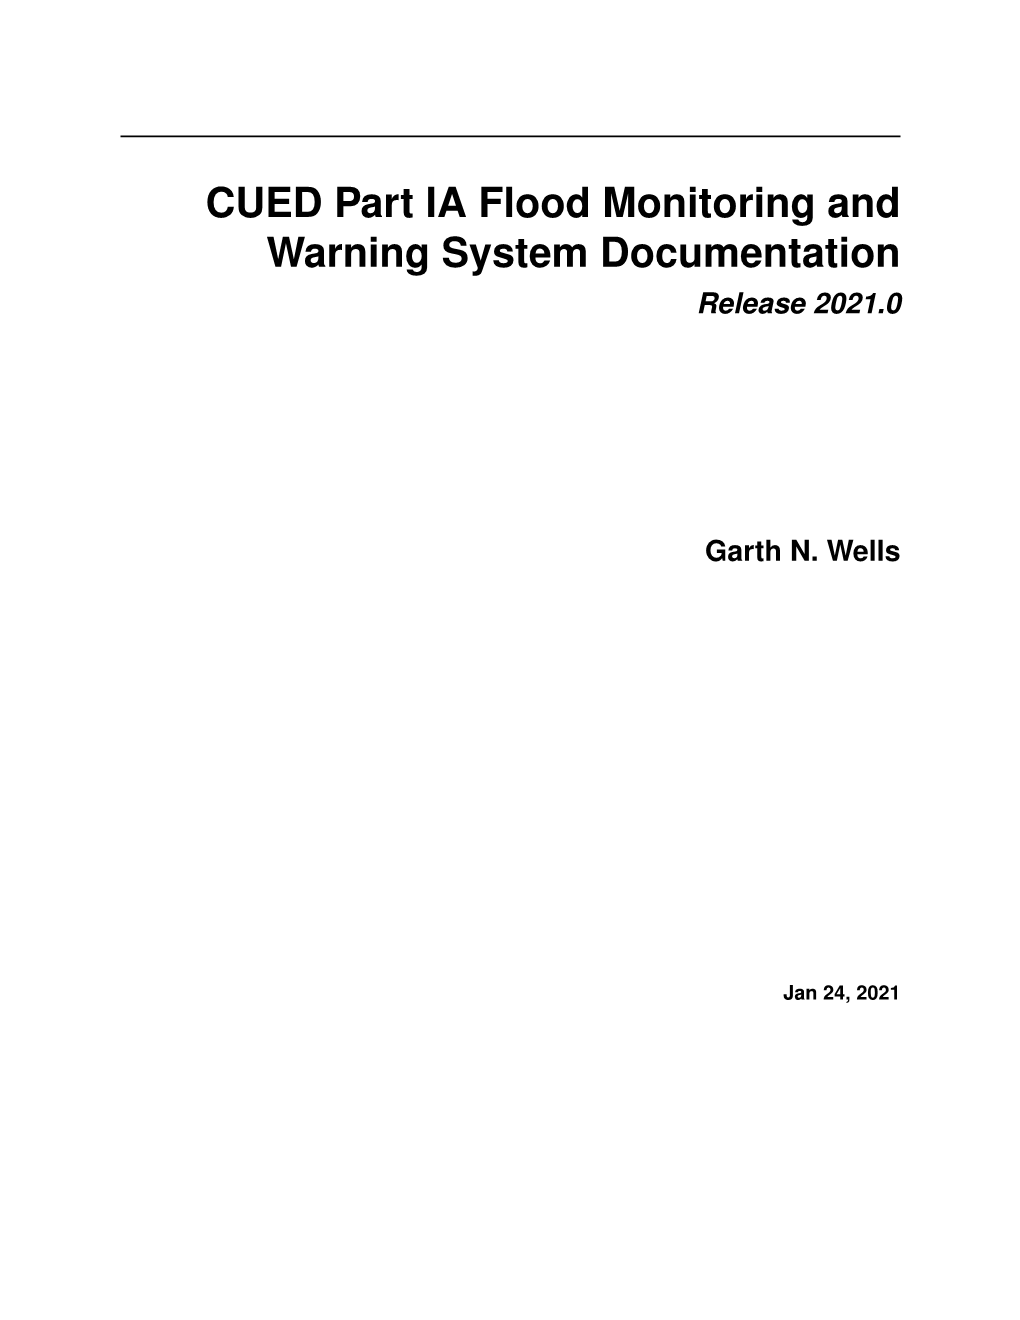 CUED Part IA Flood Monitoring and Warning System Documentation Release 2021.0